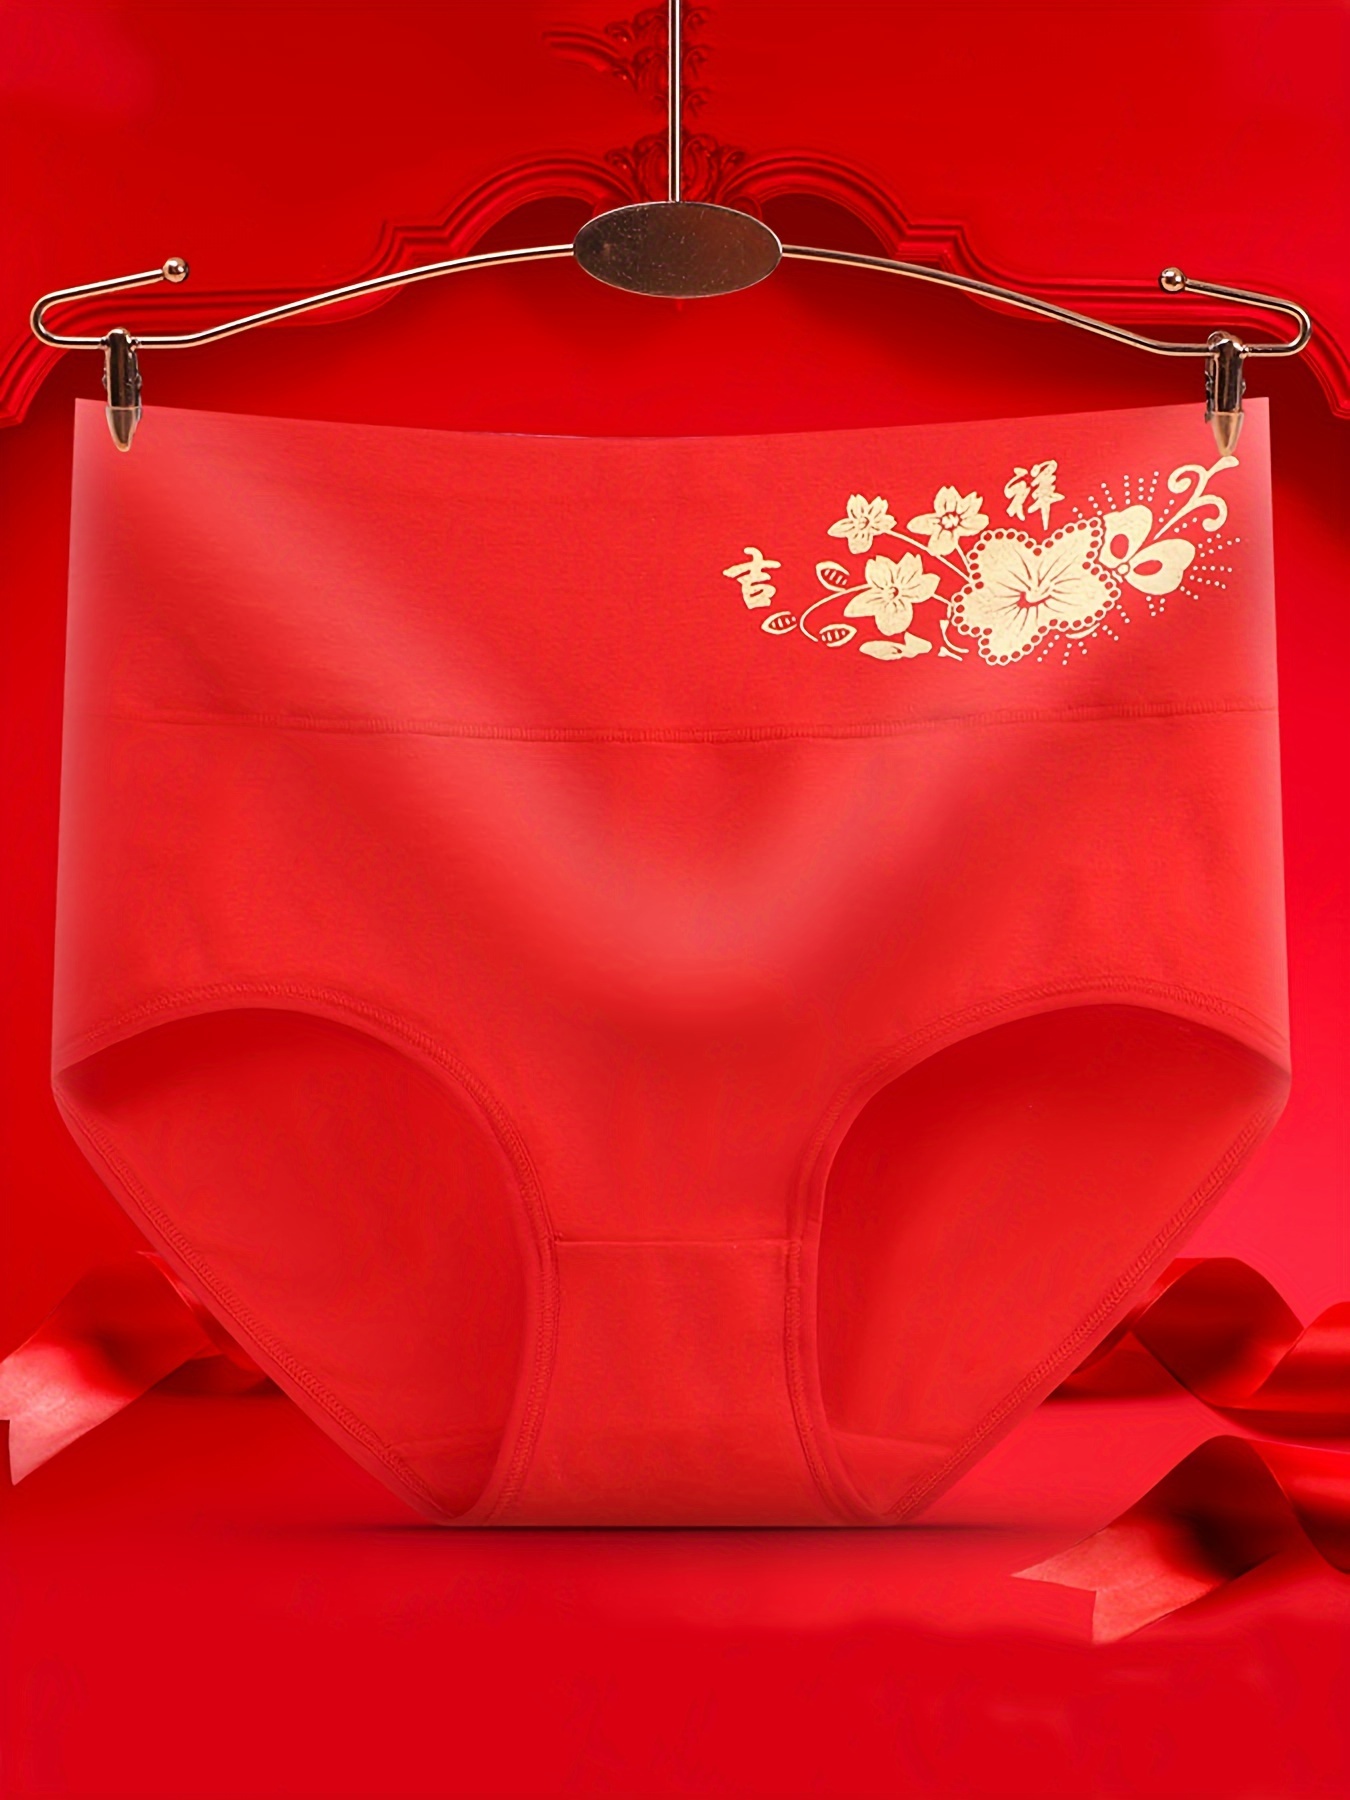 Red panties and text happy new year Stock Photo by ©nito103 134898960